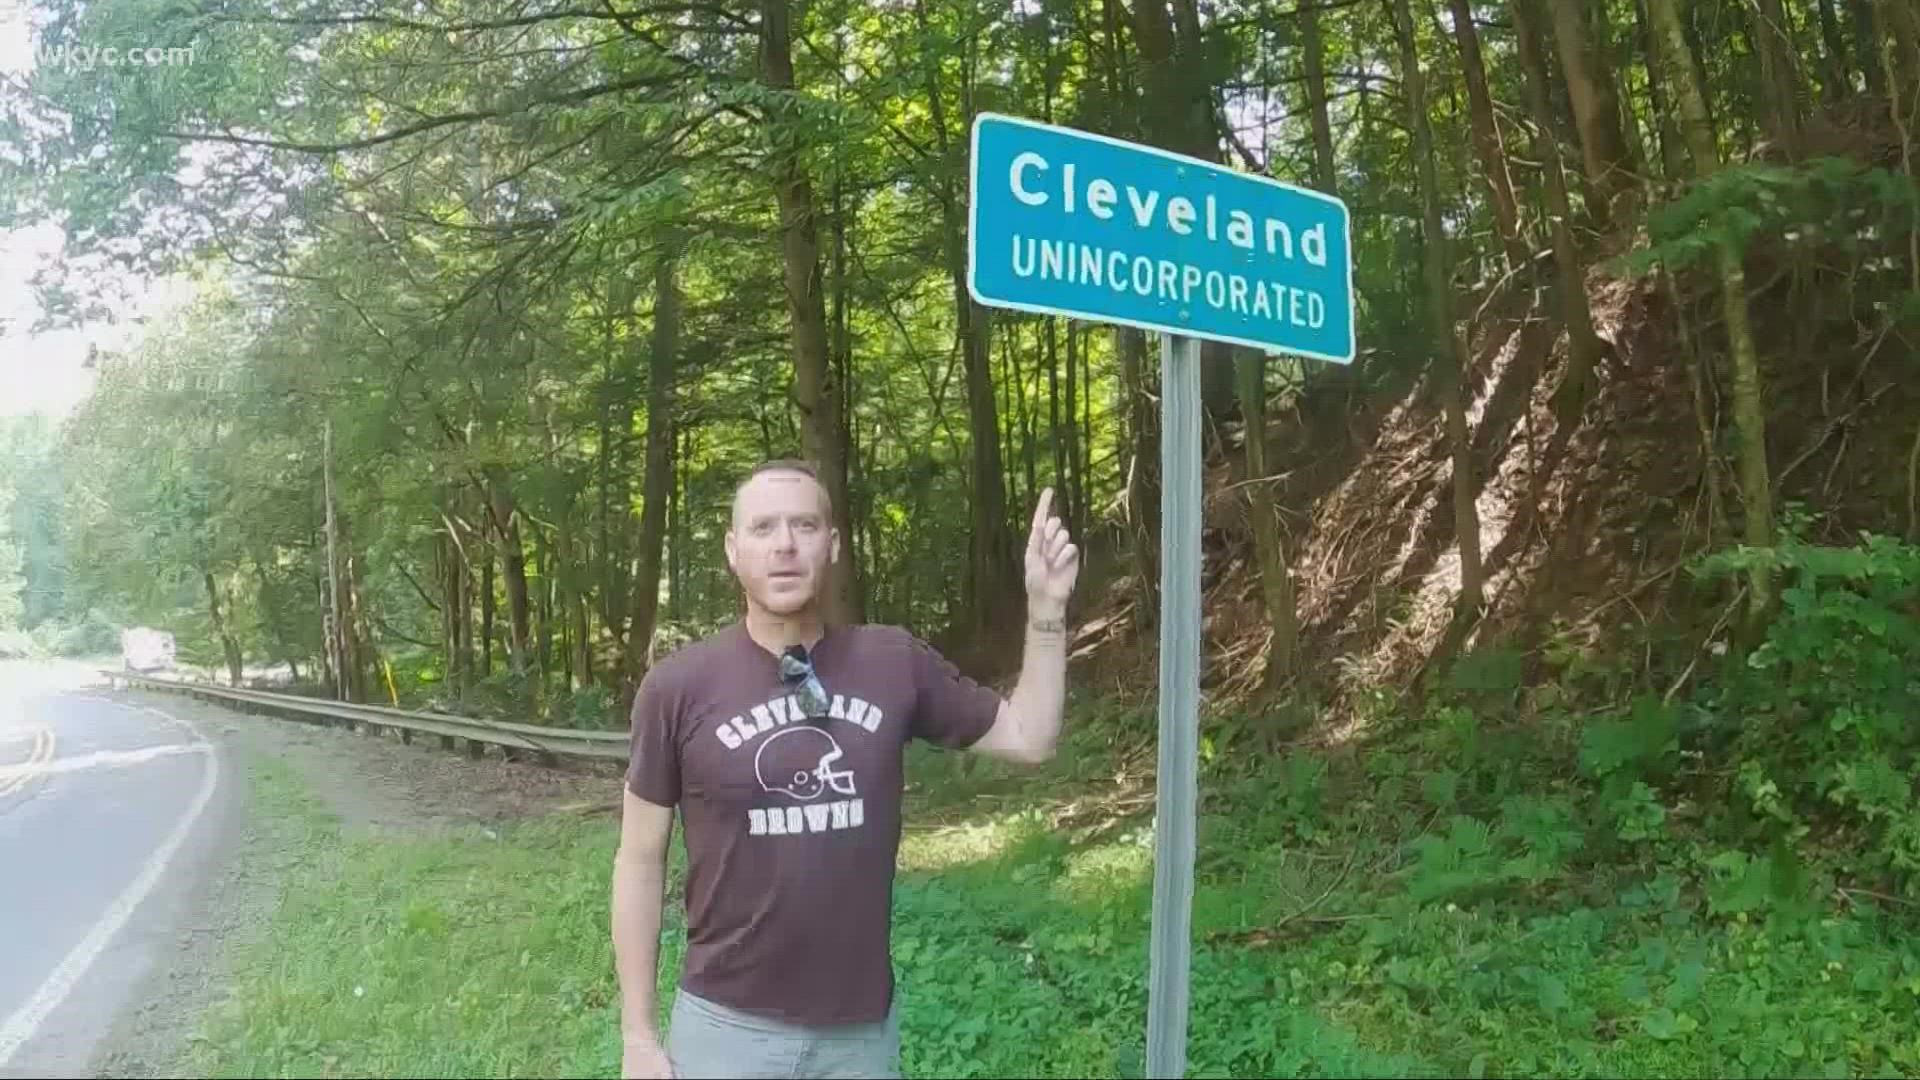 There's more than one city in the U.S. with the name Cleveland. We sent Mike Polk Jr. to the nearest one to see what it was like.